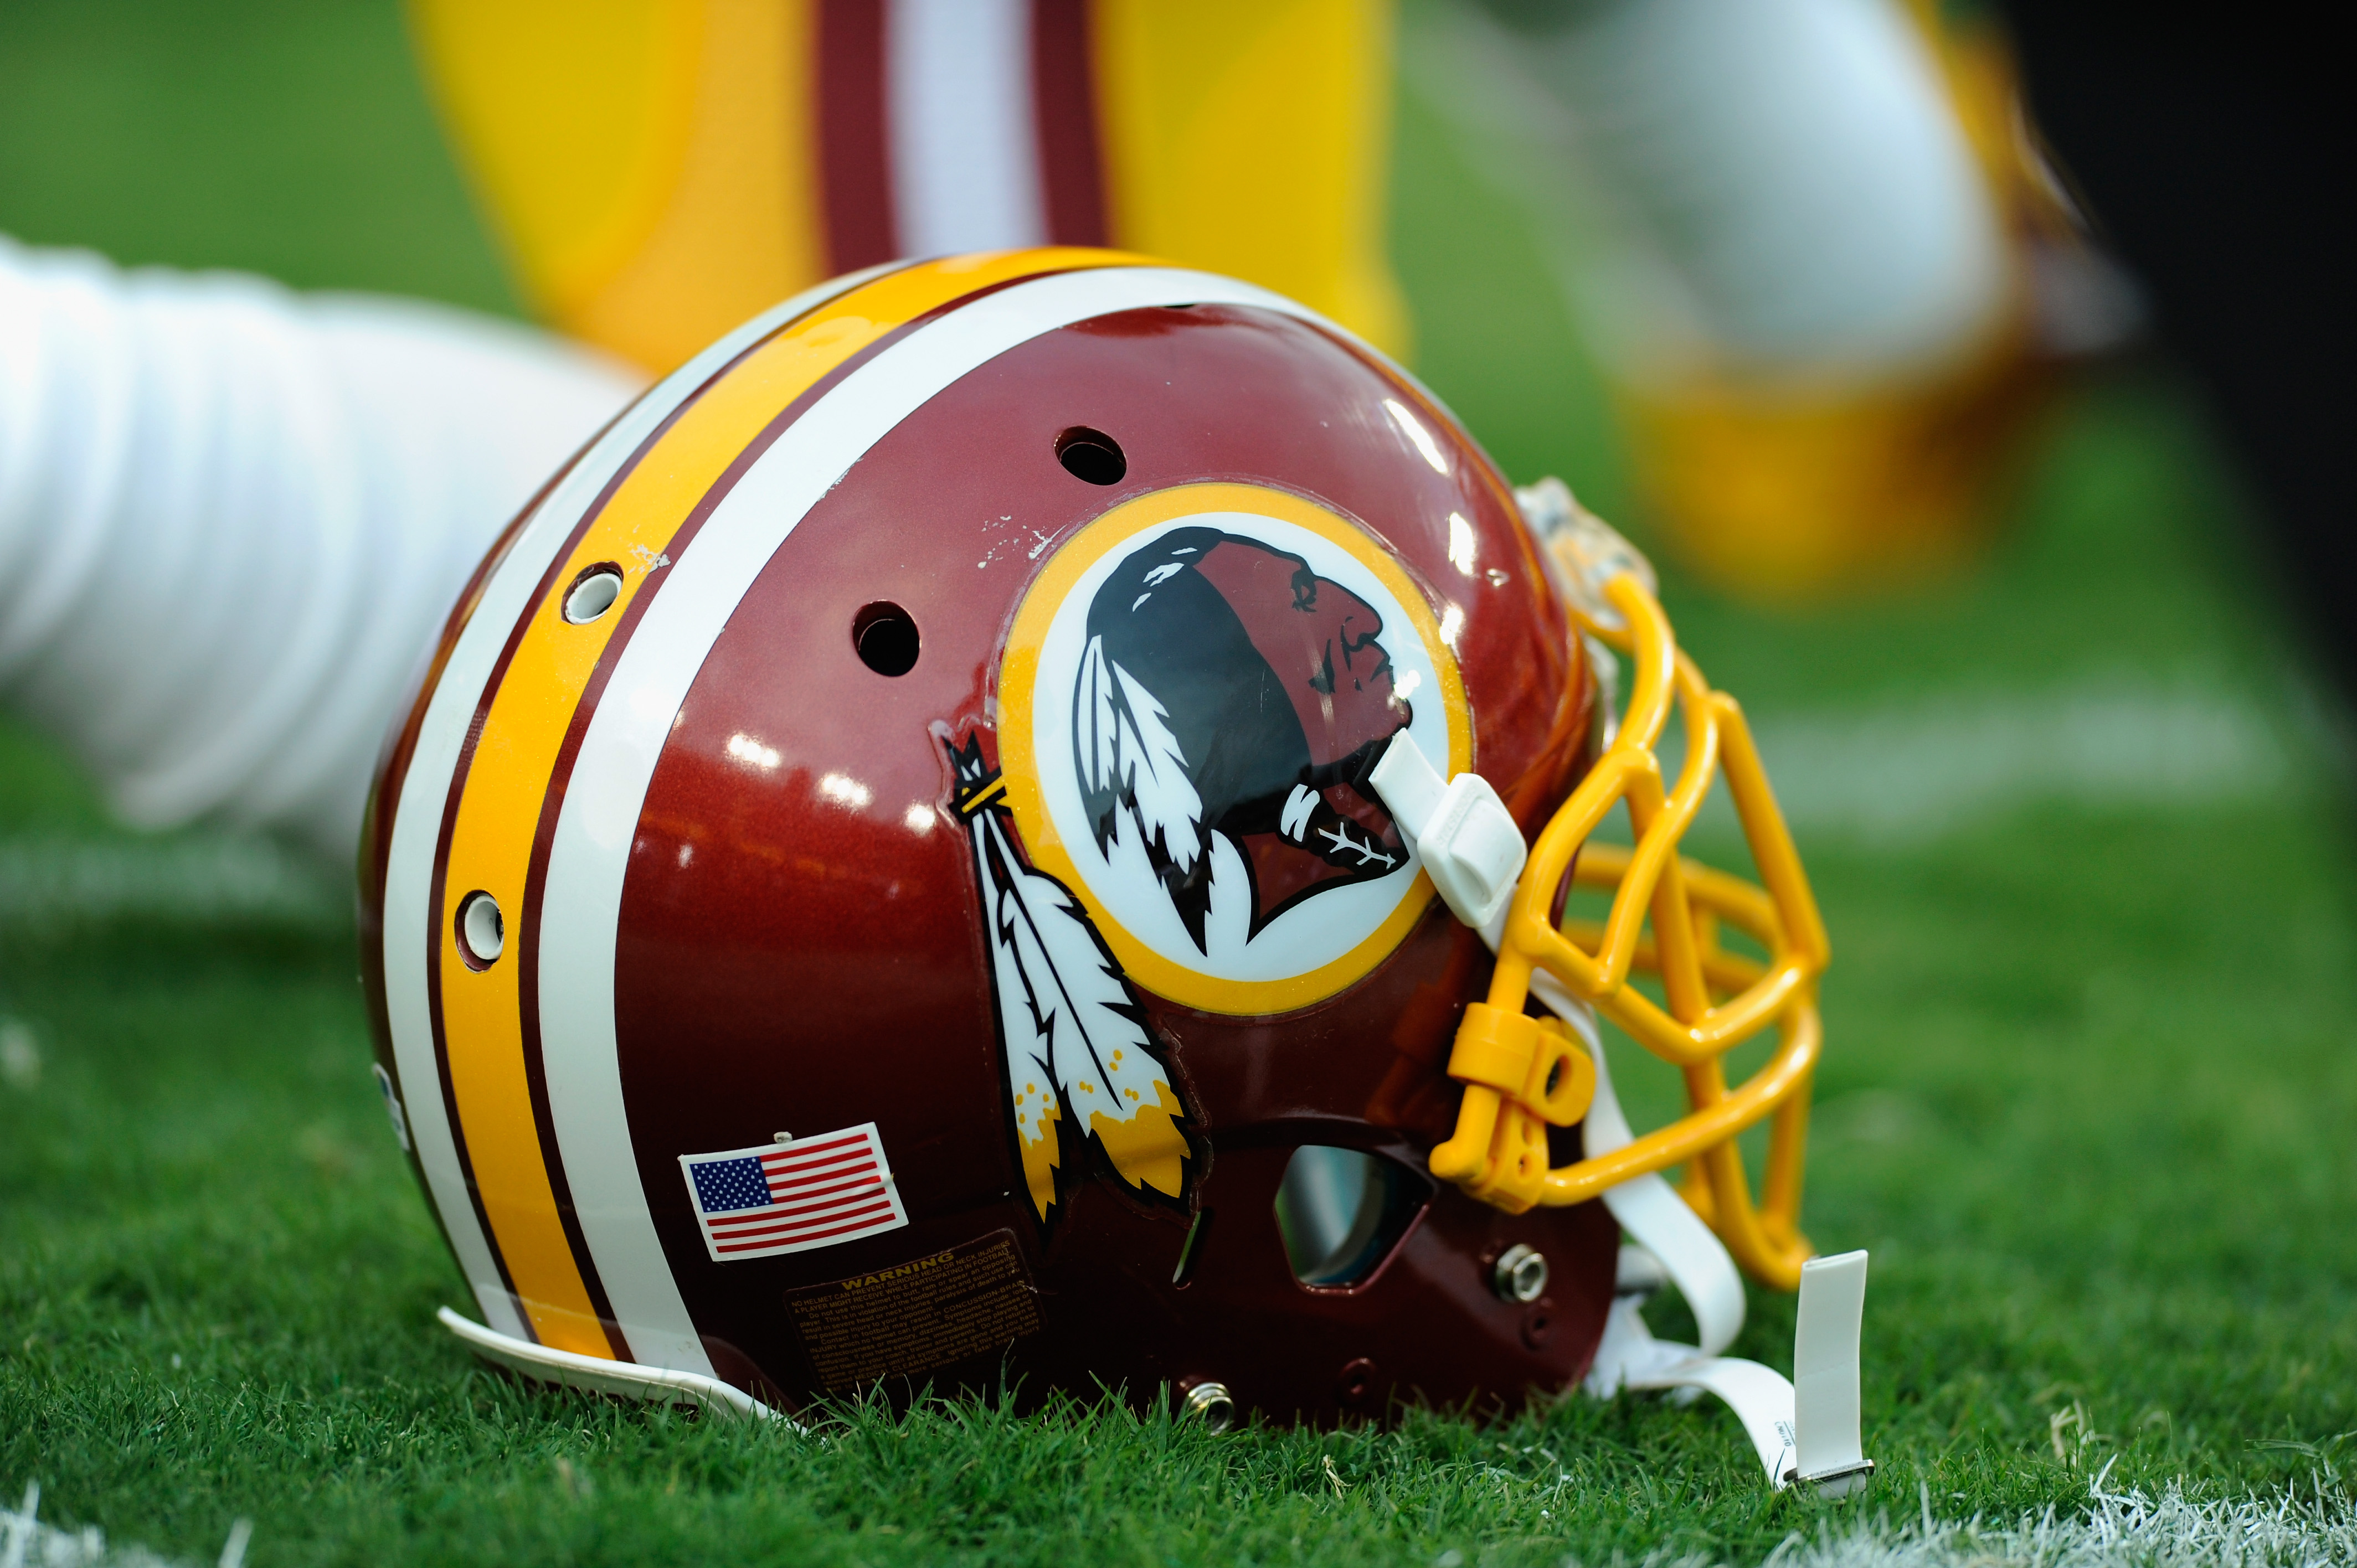 A Washington Redskins helmet sits on the grass during a preseason football game between the Redskins and Cleveland Browns at FedExField on August 18, 2014 in Landover, Maryland. (TJ Root—Getty Images)